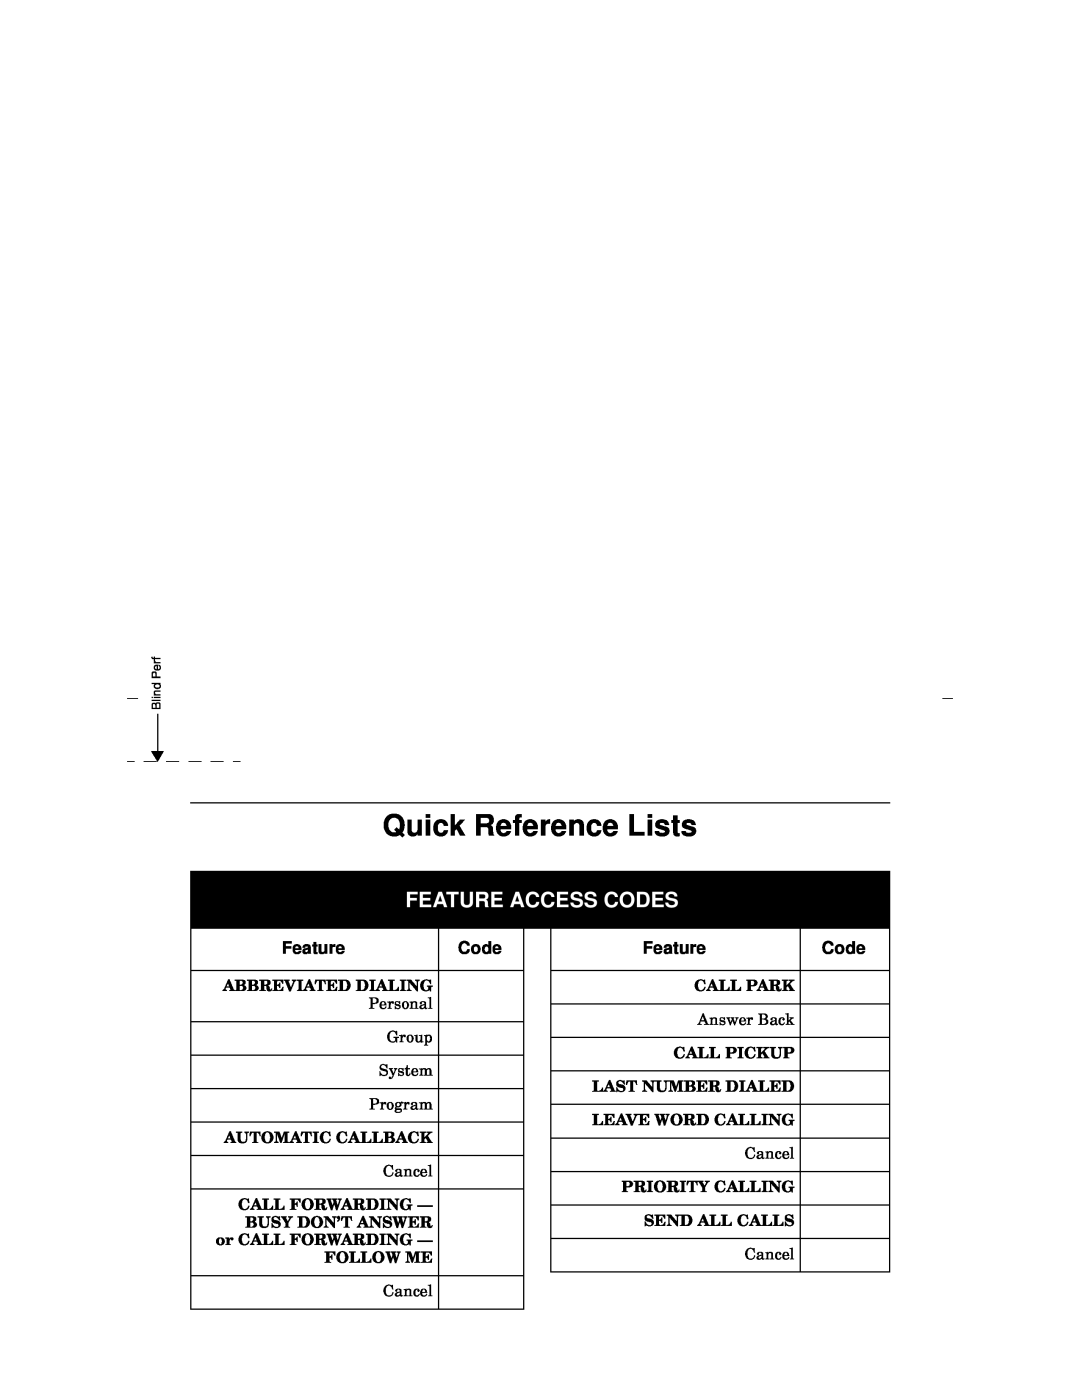 Lucent Technologies 8405 Feature Access Codes, Quick Reference Lists, Abbreviated Dialing, Personal Group System Program 